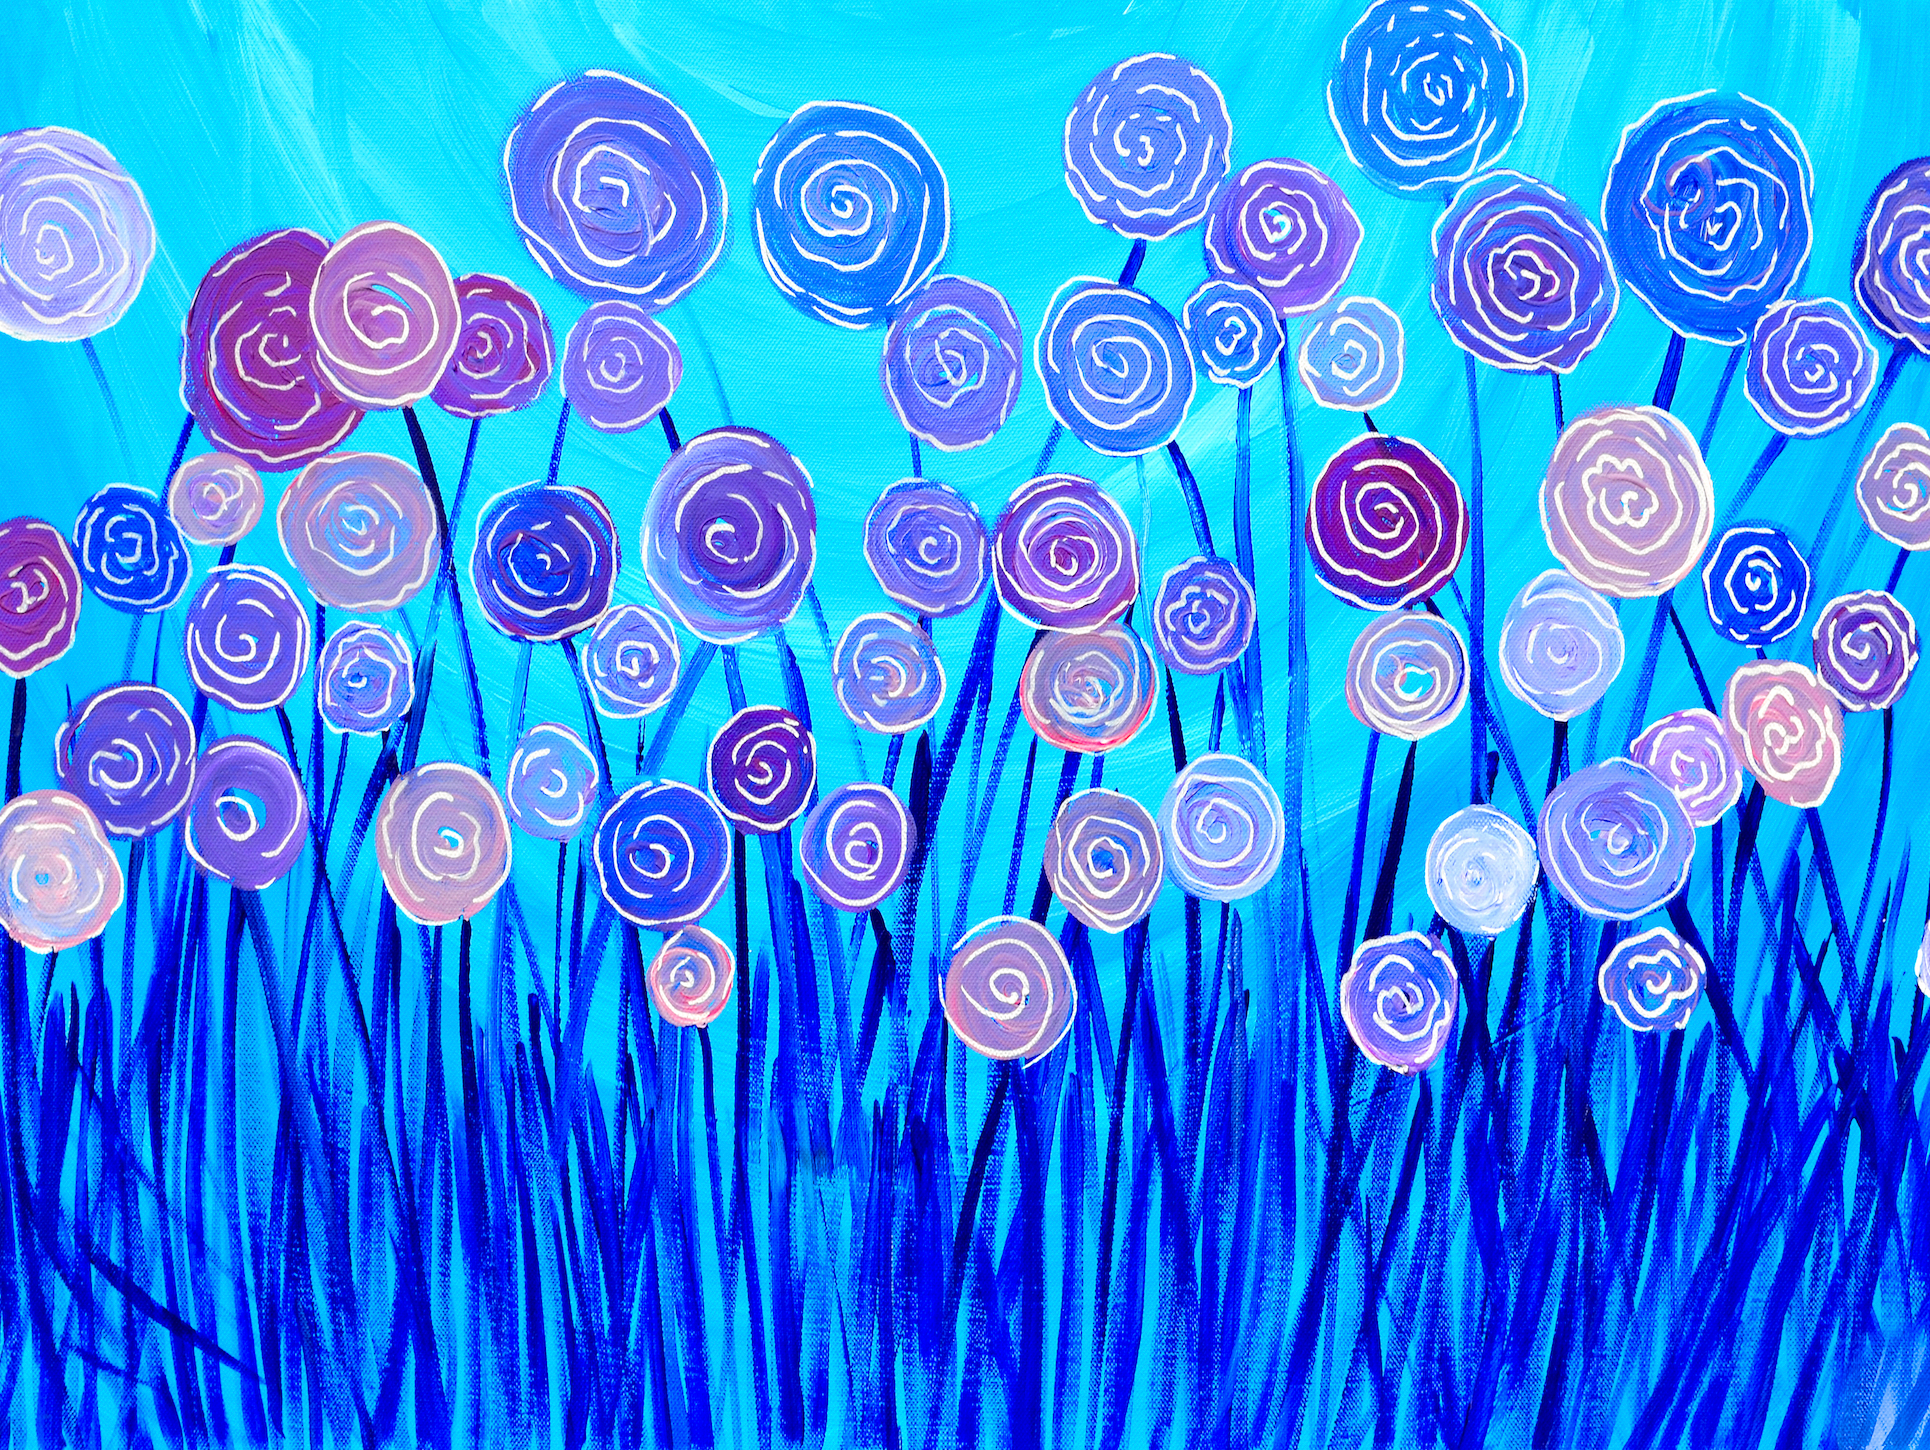 Blue & Lilac Abstract Flowers Mixed Media Painting by Louise Mead